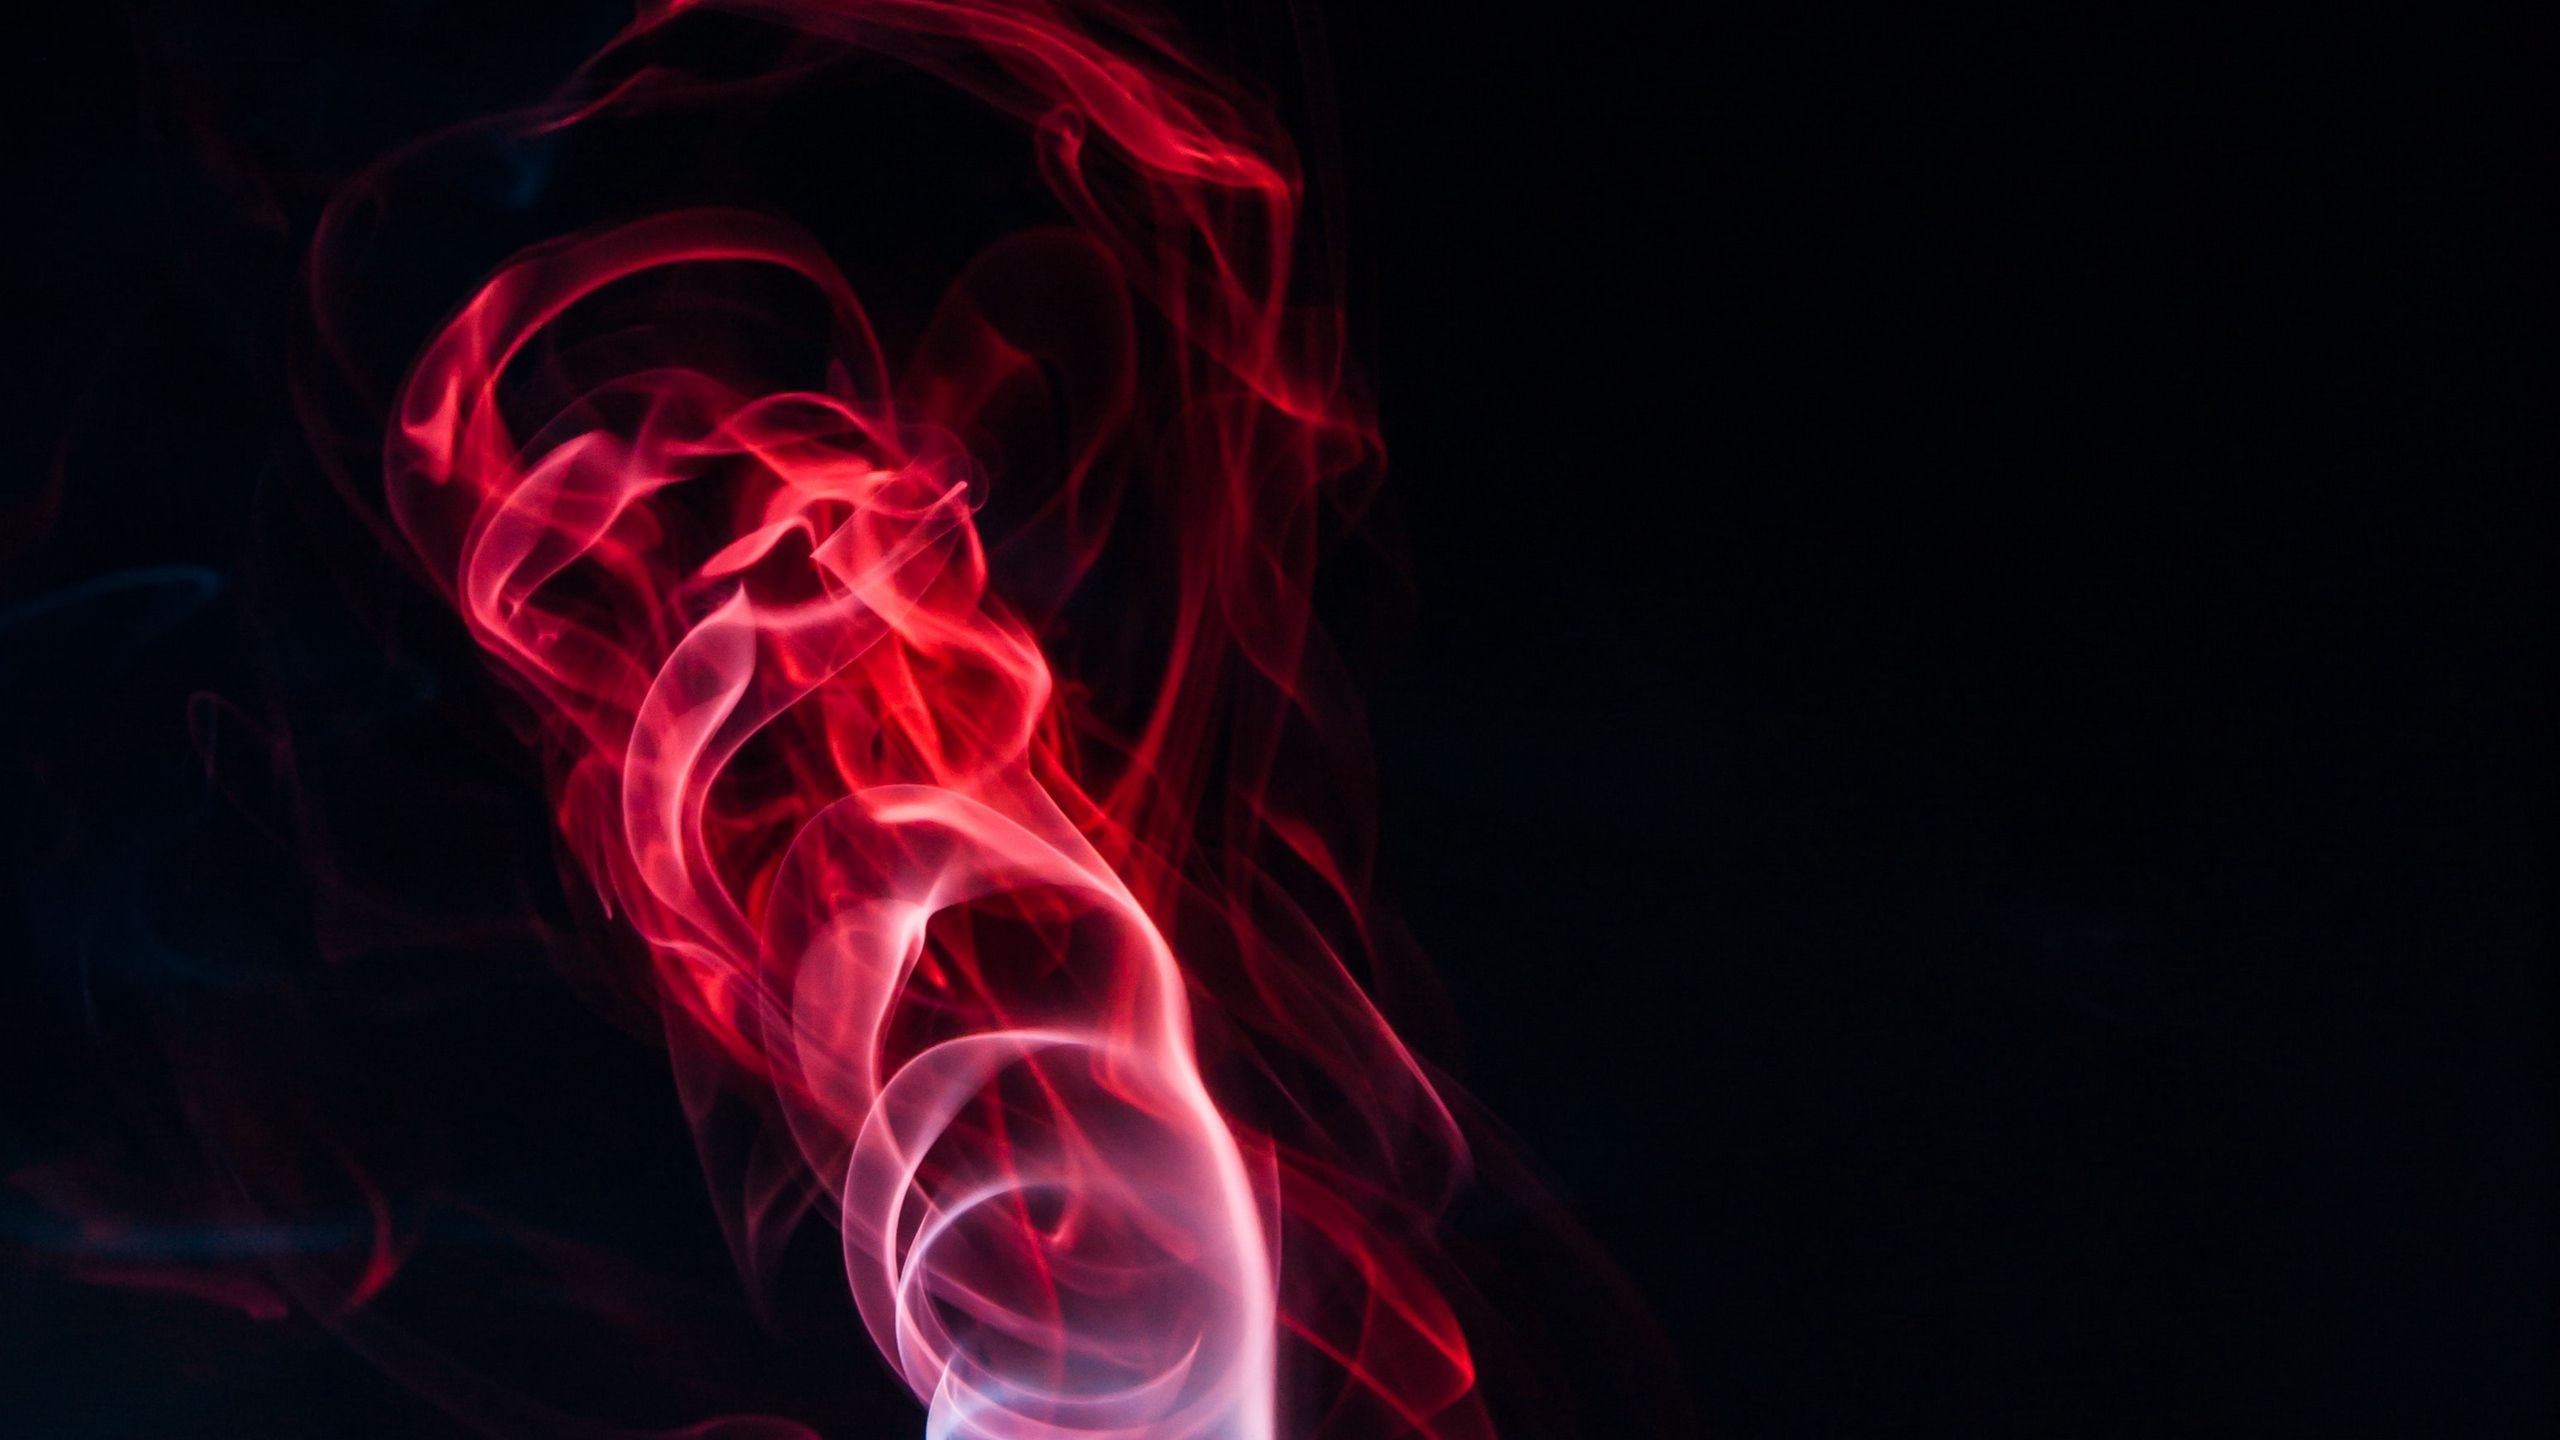 Download wallpaper 2560x1440 colored smoke, shroud, bunches, red